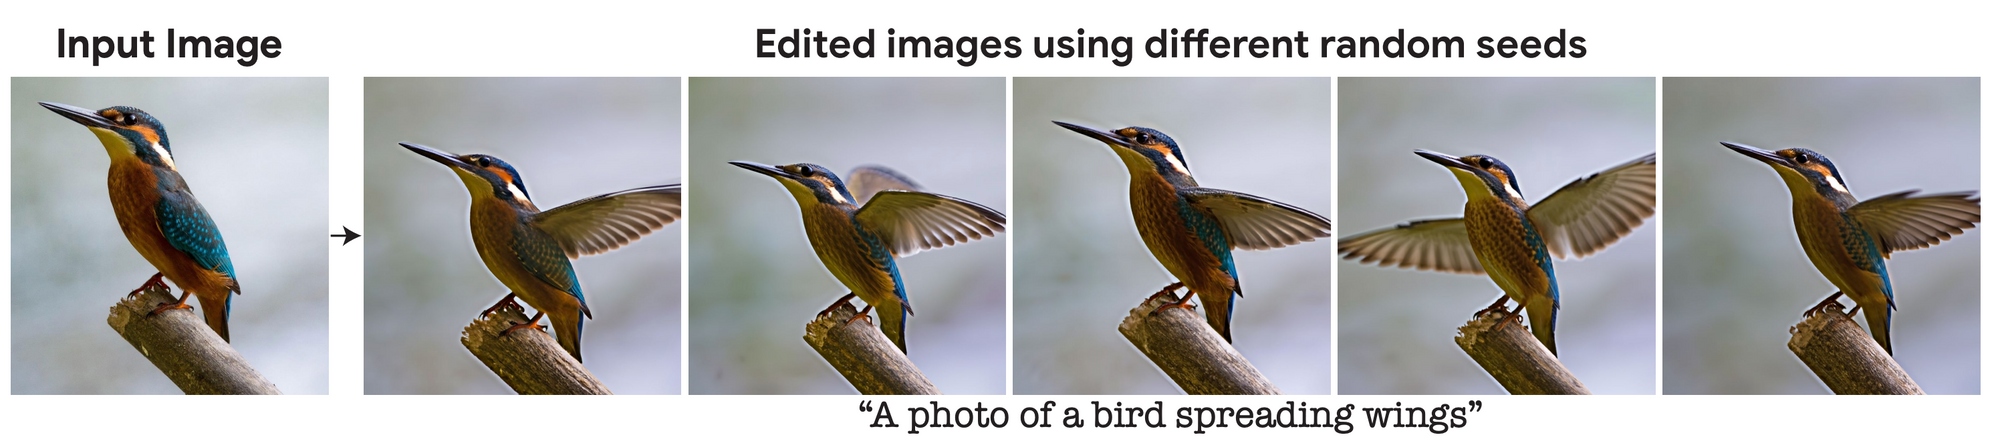 AI Image Editing from Text! Imagic Explained